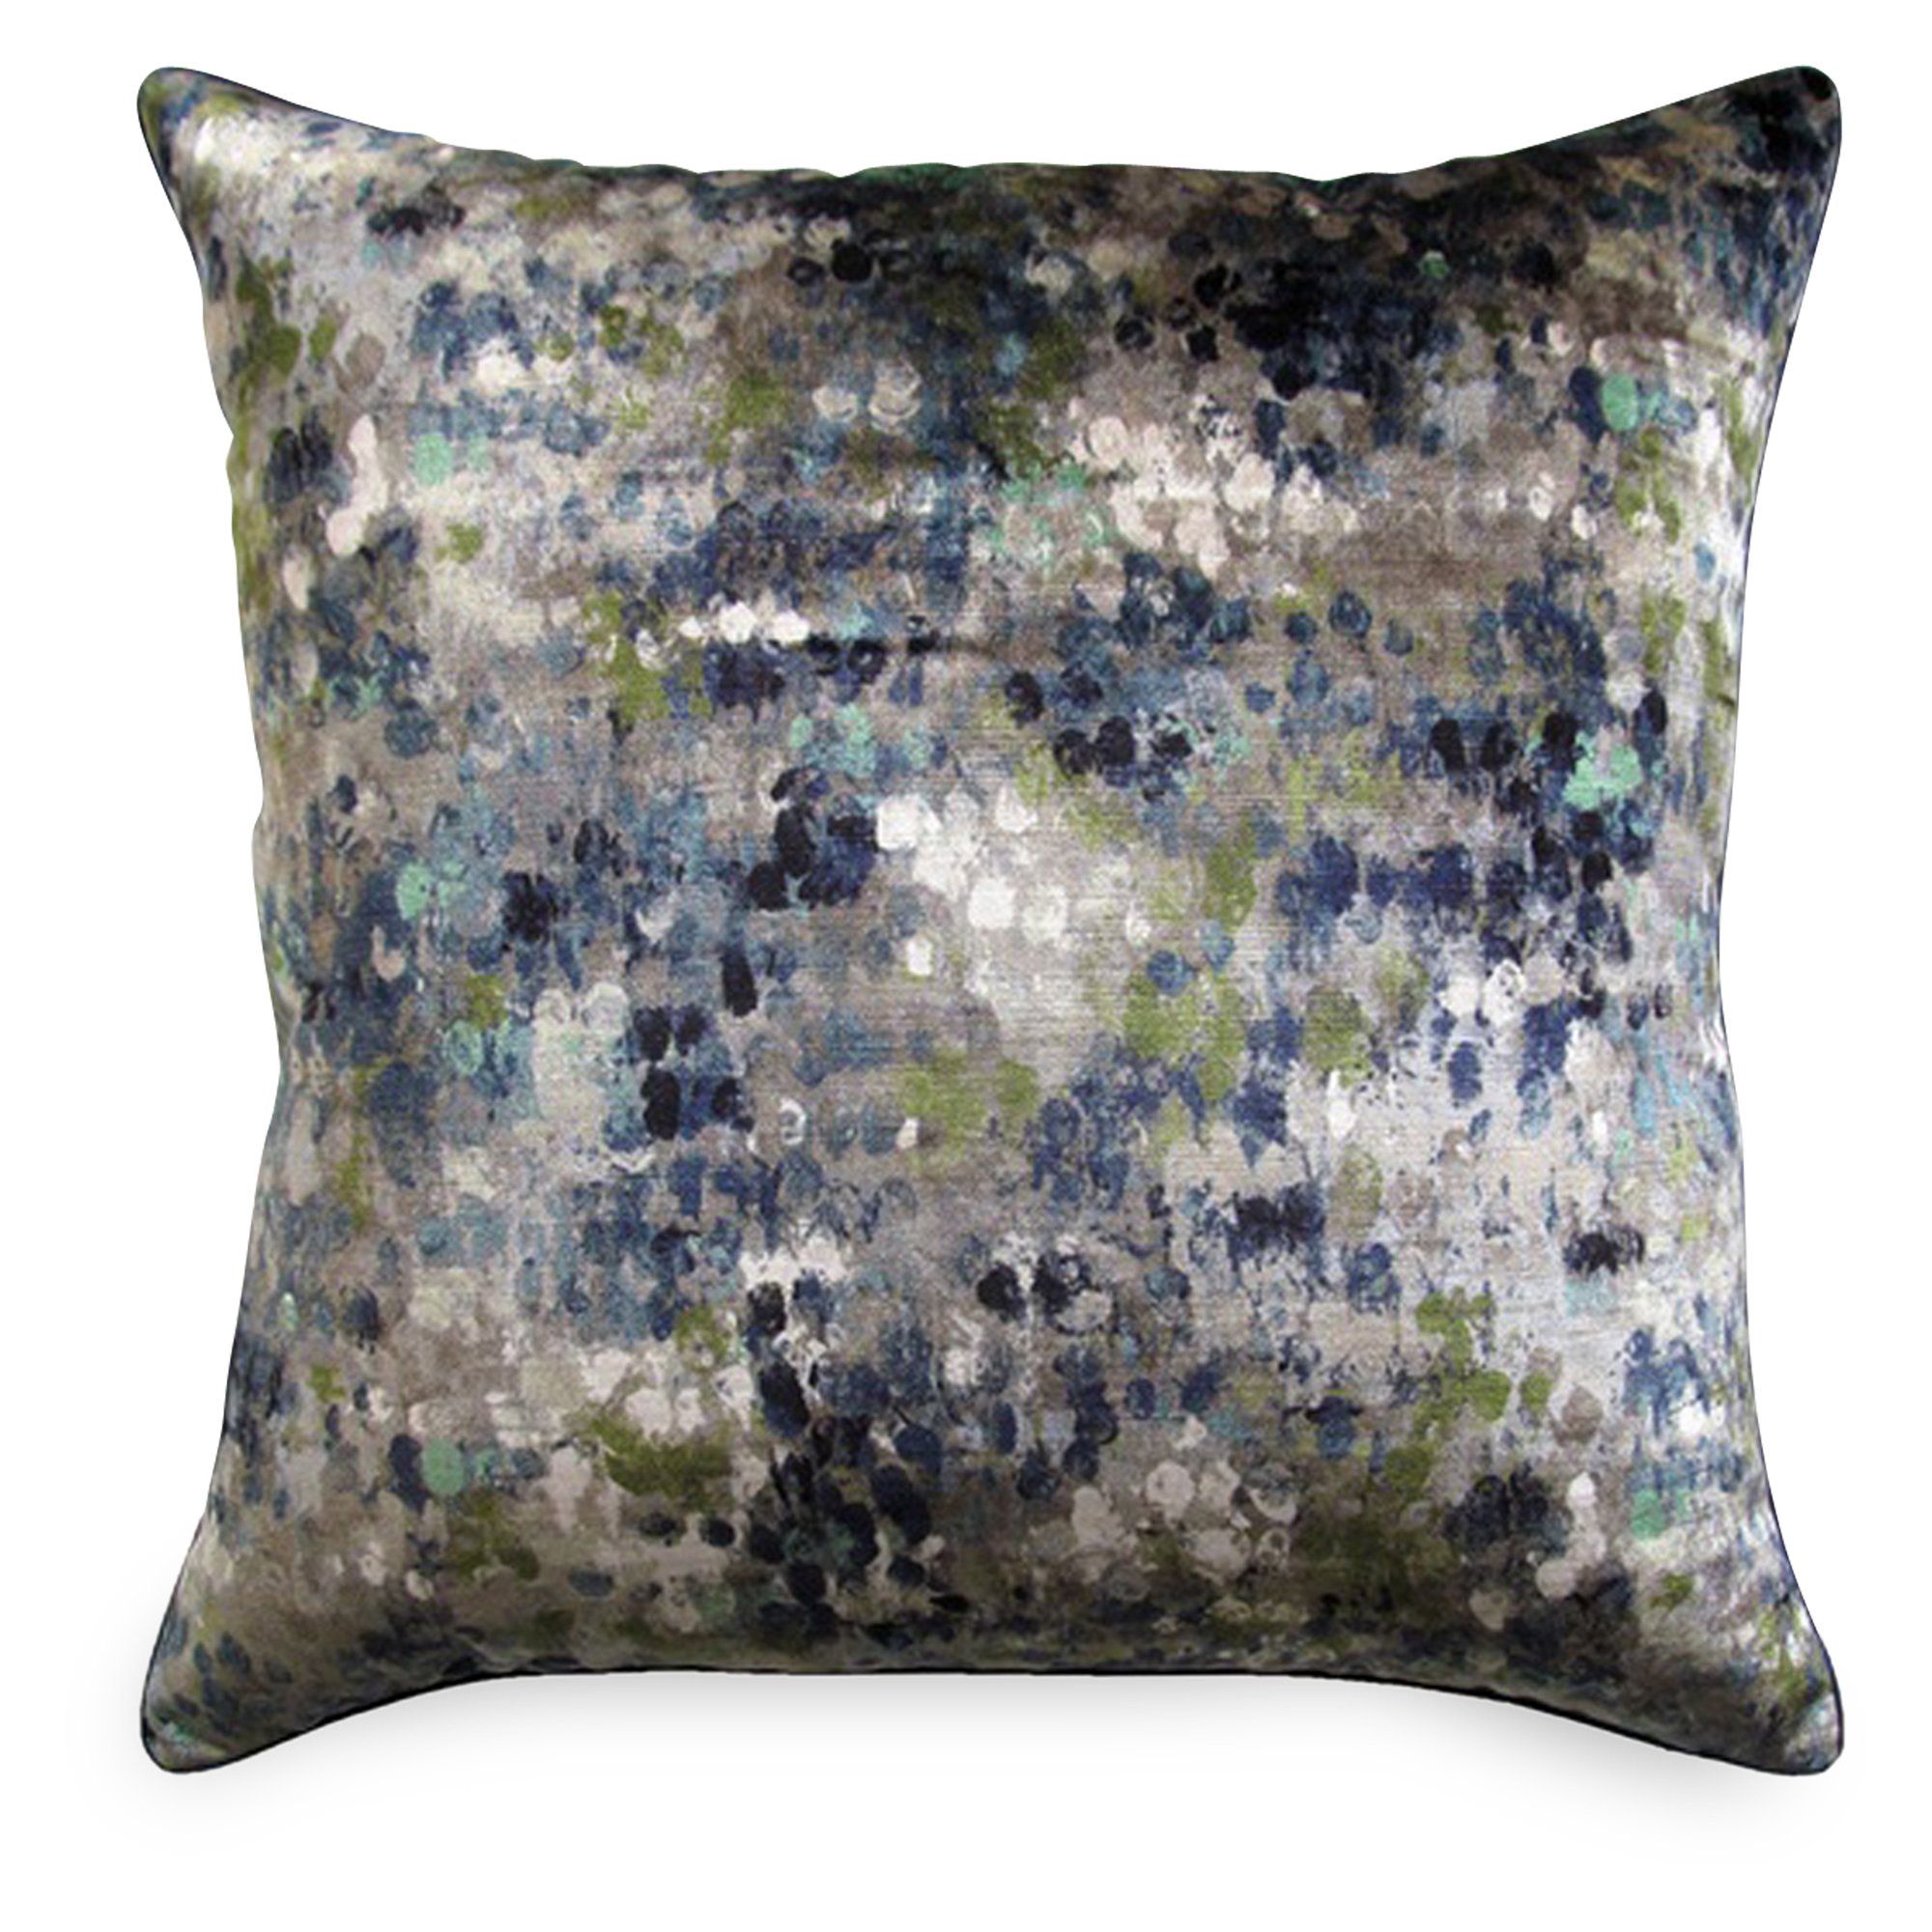 This Drop Cloth Pillow features an abstract brushstroke pattern in shades of grey and yellow velvet.